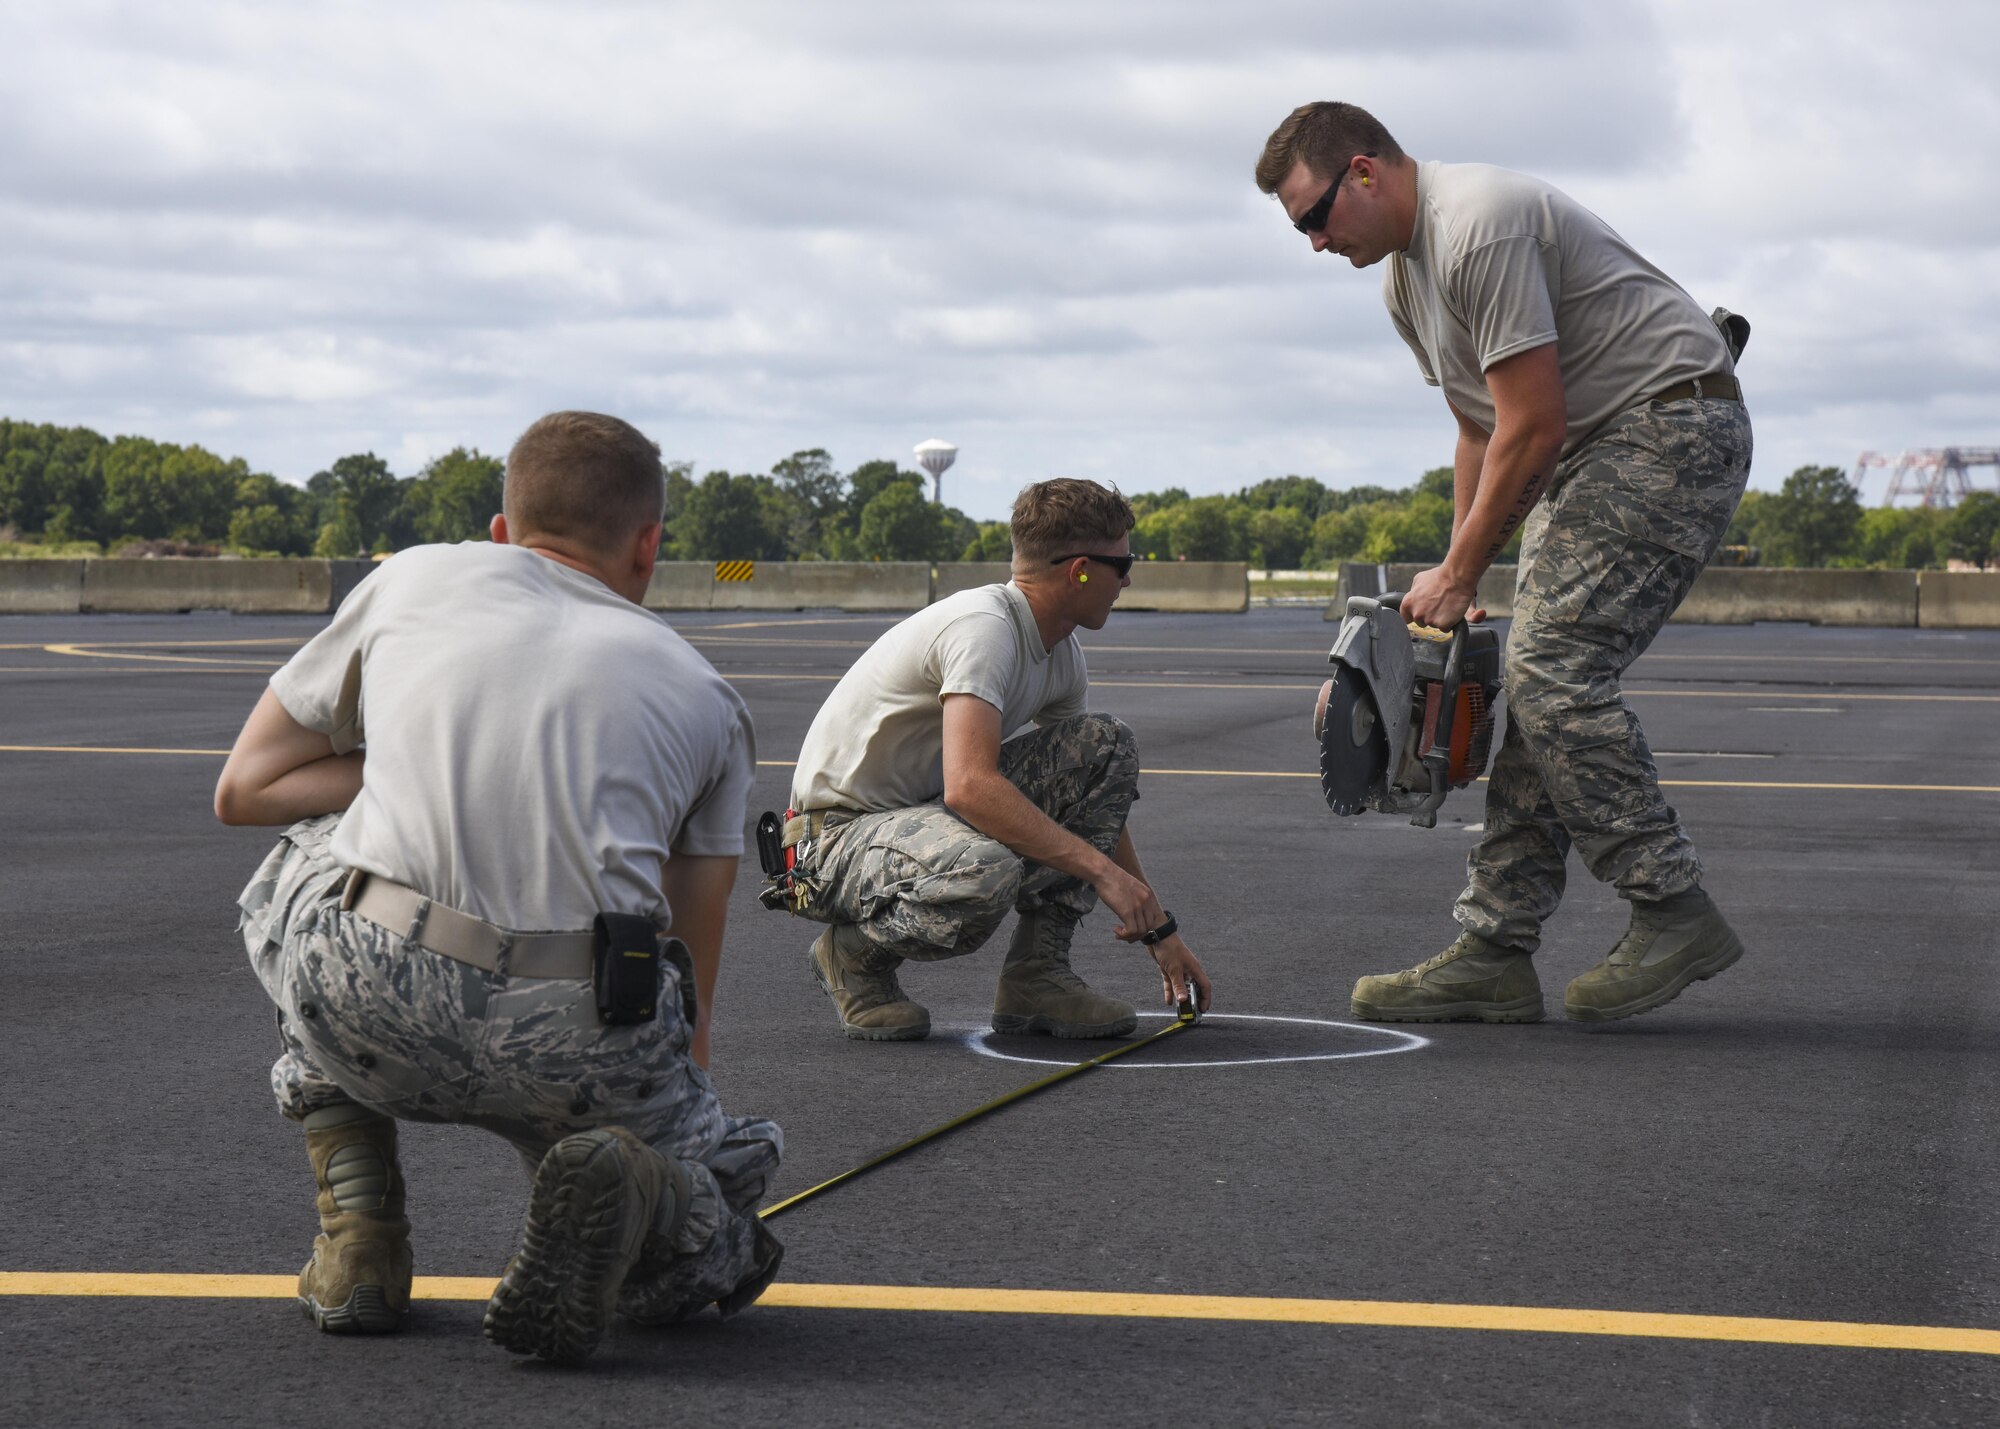 (From Left) U.S. Air Force Airman 1st Class Brandon Whittle, 633rd Civil Engineer Squadron pavements and construction apprentice, Senior Airman Corey Reeves, 633rd CES pavements and construction craftsman, and Staff Sgt. Trevor Harrison, 633rd CES pavements and construction craftsman, prepare to cut the pavement at Joint Base Langley-Eustis, Va., Sept. 25, 2017.